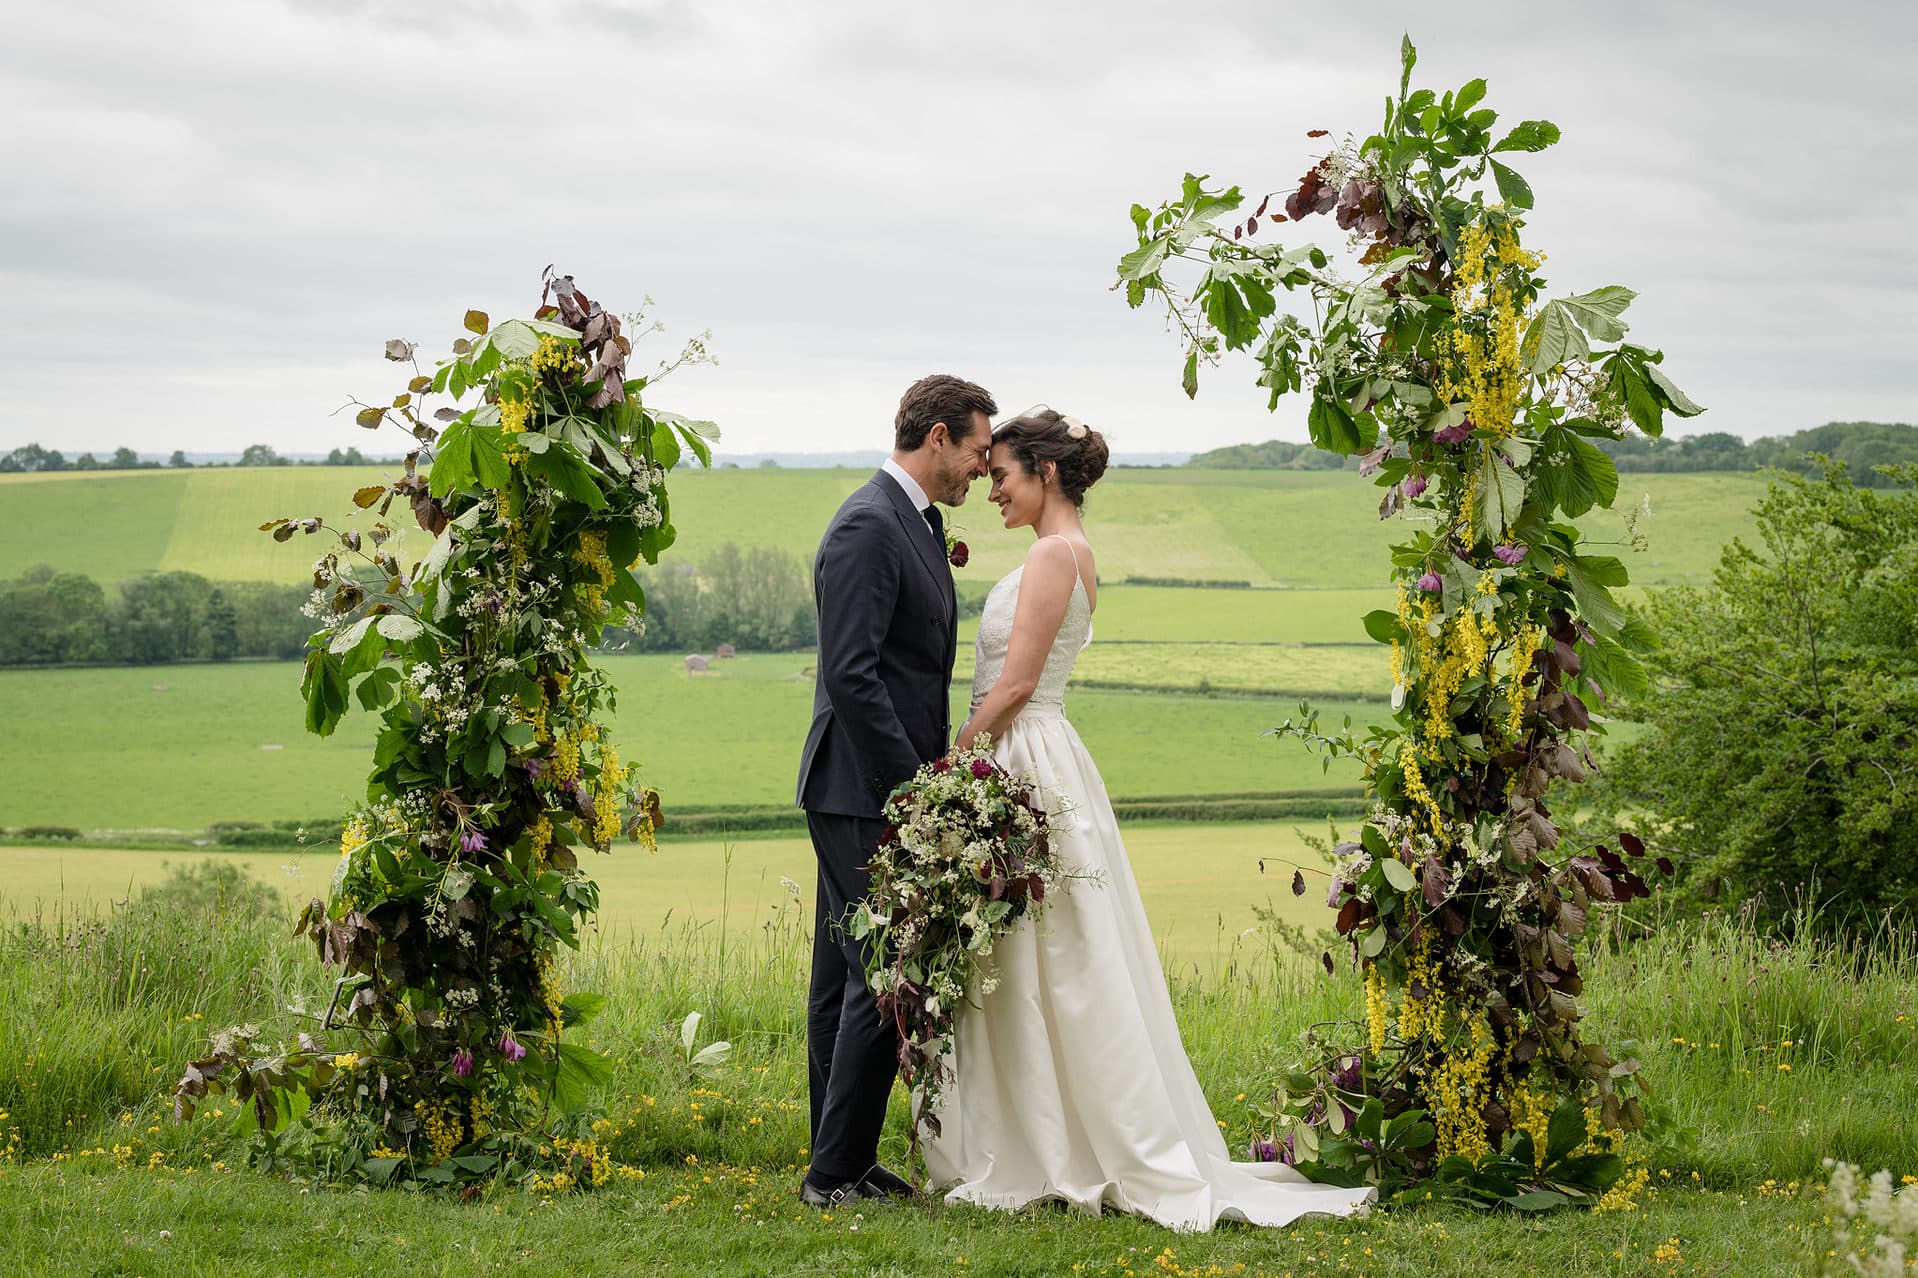 Bride and groom stood together between a deconstructed floral arch with views of rolling hills in the background